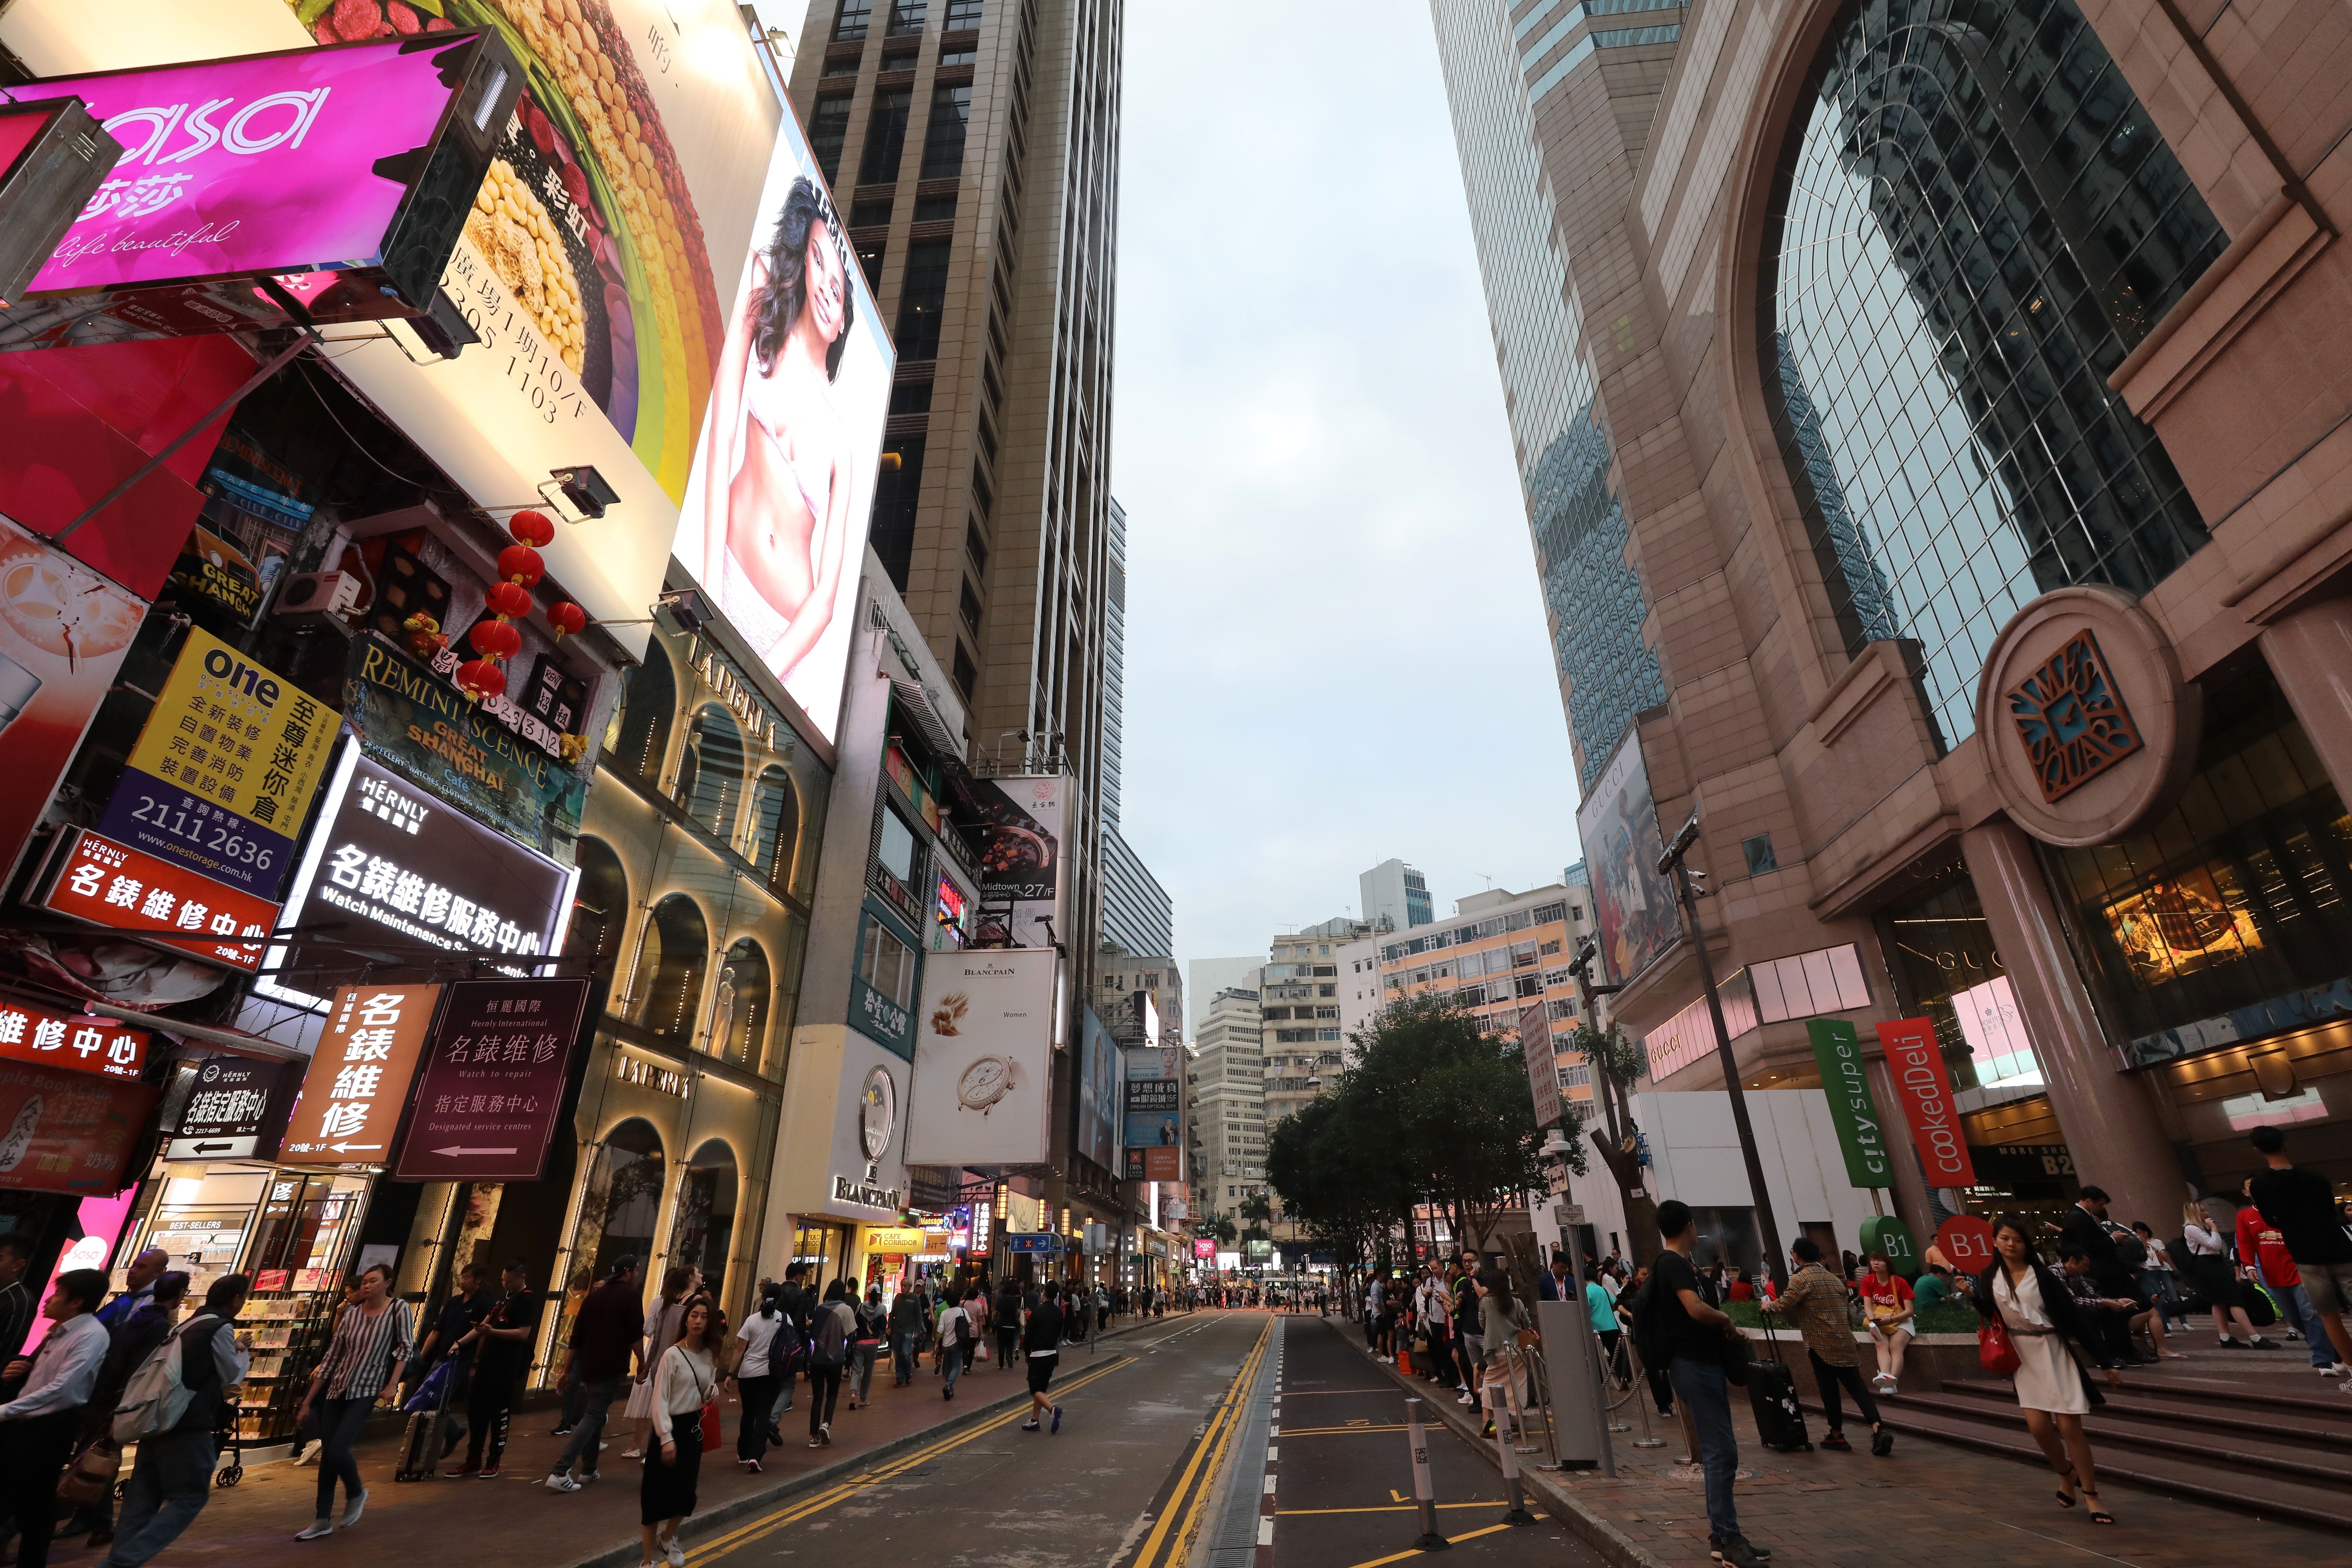 Hong Kong’s retail market peaked in 2013 to 2014 and entered into a downturn in 2015 lasting two years. Some of the highest retail rents in the city during the peak were at Russell Street in Causeway Bay. Photo: Dickson Lee